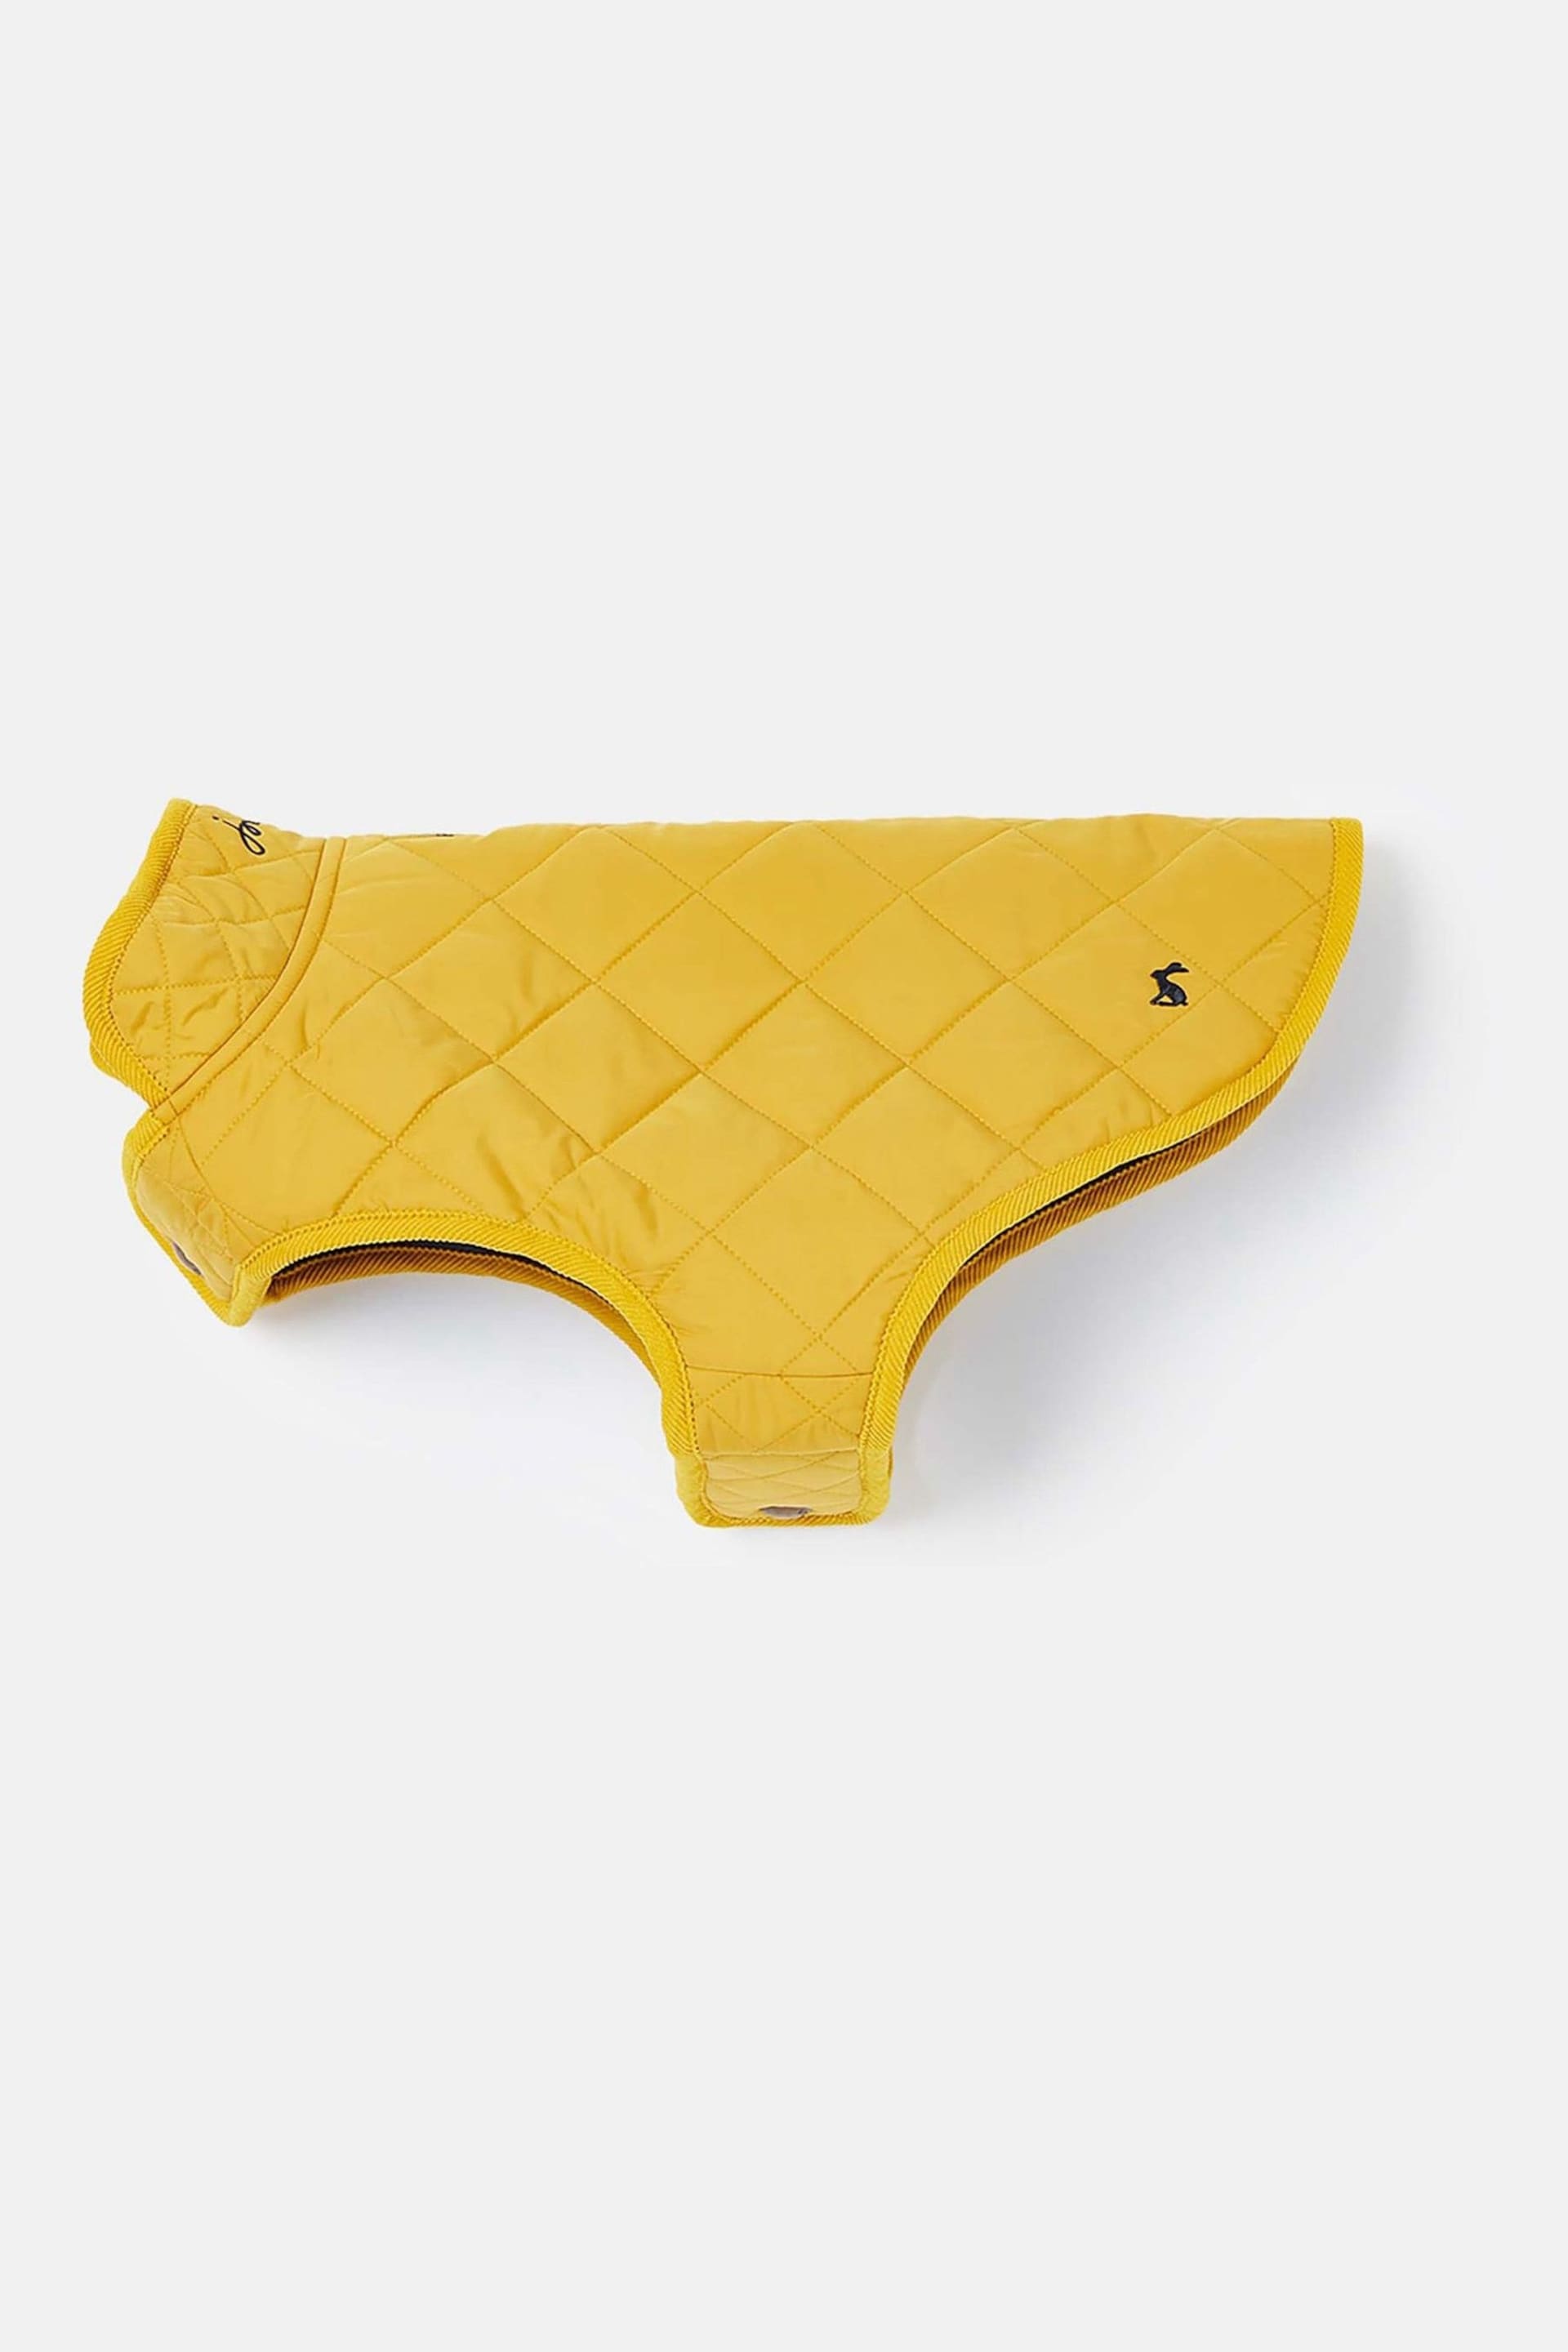 Joules Yellow Quilted Dog Coat - Image 3 of 4